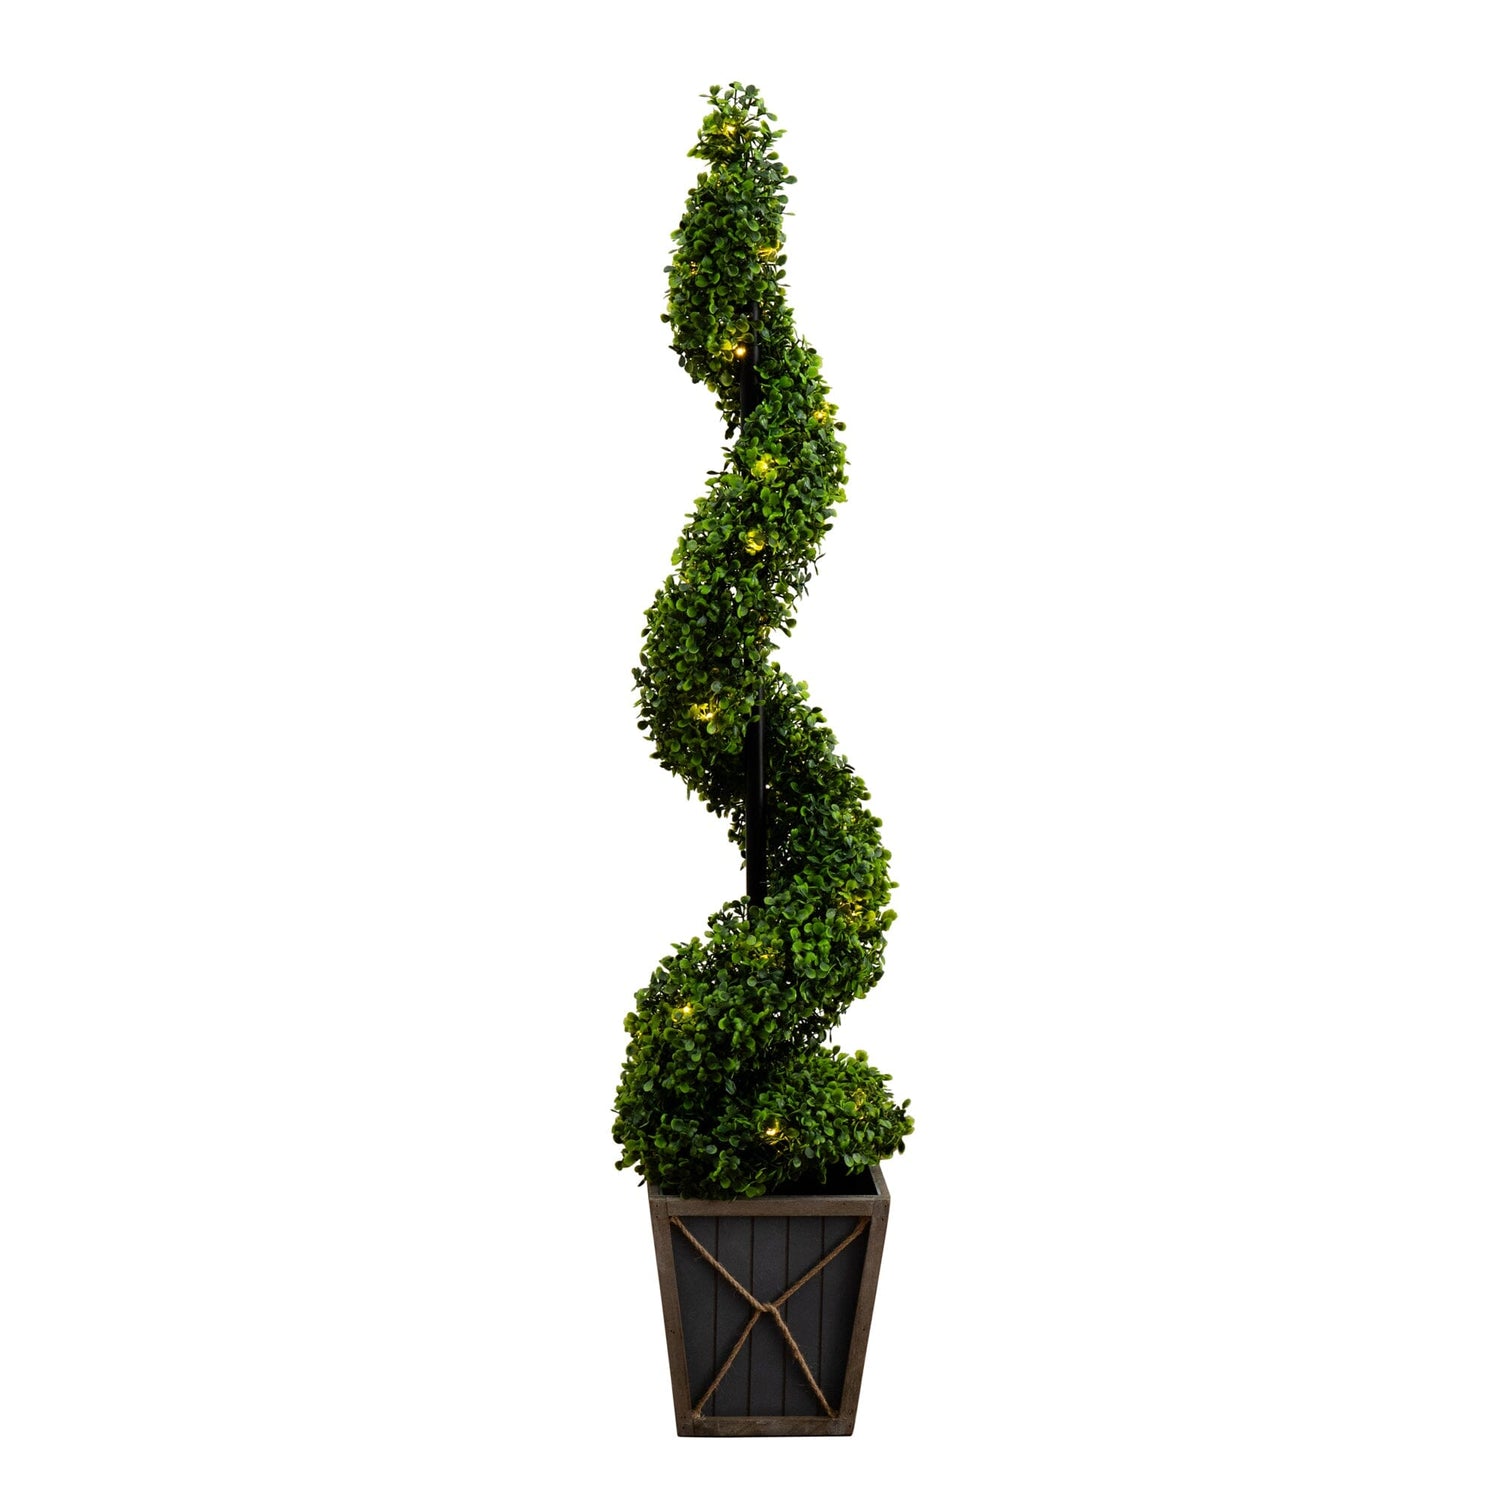 45” UV Resistant Artificial Boxwood Spiral Topiary Tree with LED Lights in Decorative Planter (Indoor/Outdoor)